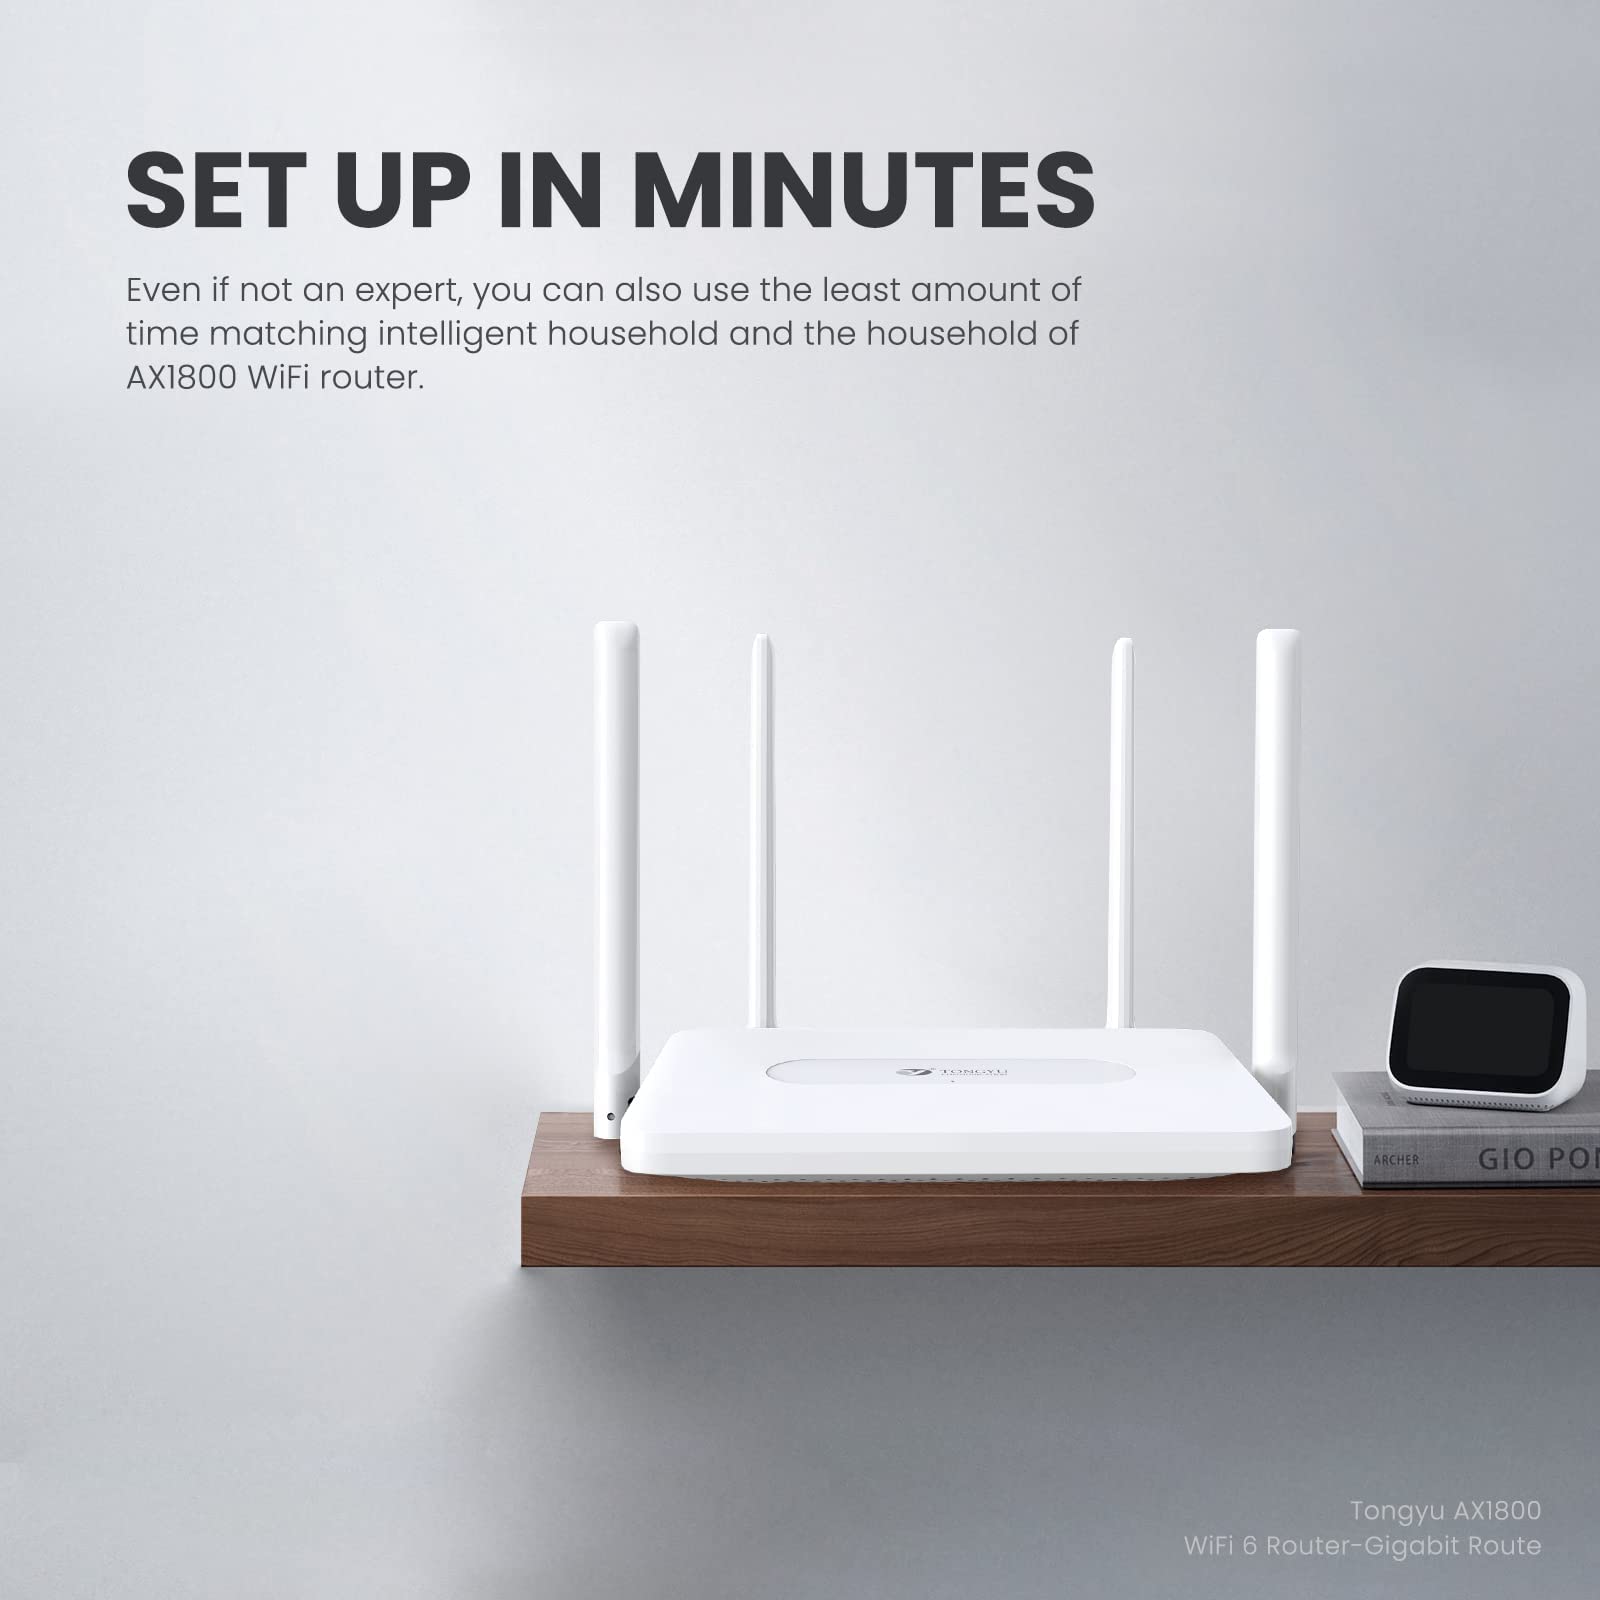 New 2023 Tongyu AX1800 WiFi 6 Router, Dual Band Gigabit Wireless 5GHz 1.8Gbps Internet Router for Gaming and Streaming and Up to 60 Devices Connected for Home, Office, Business